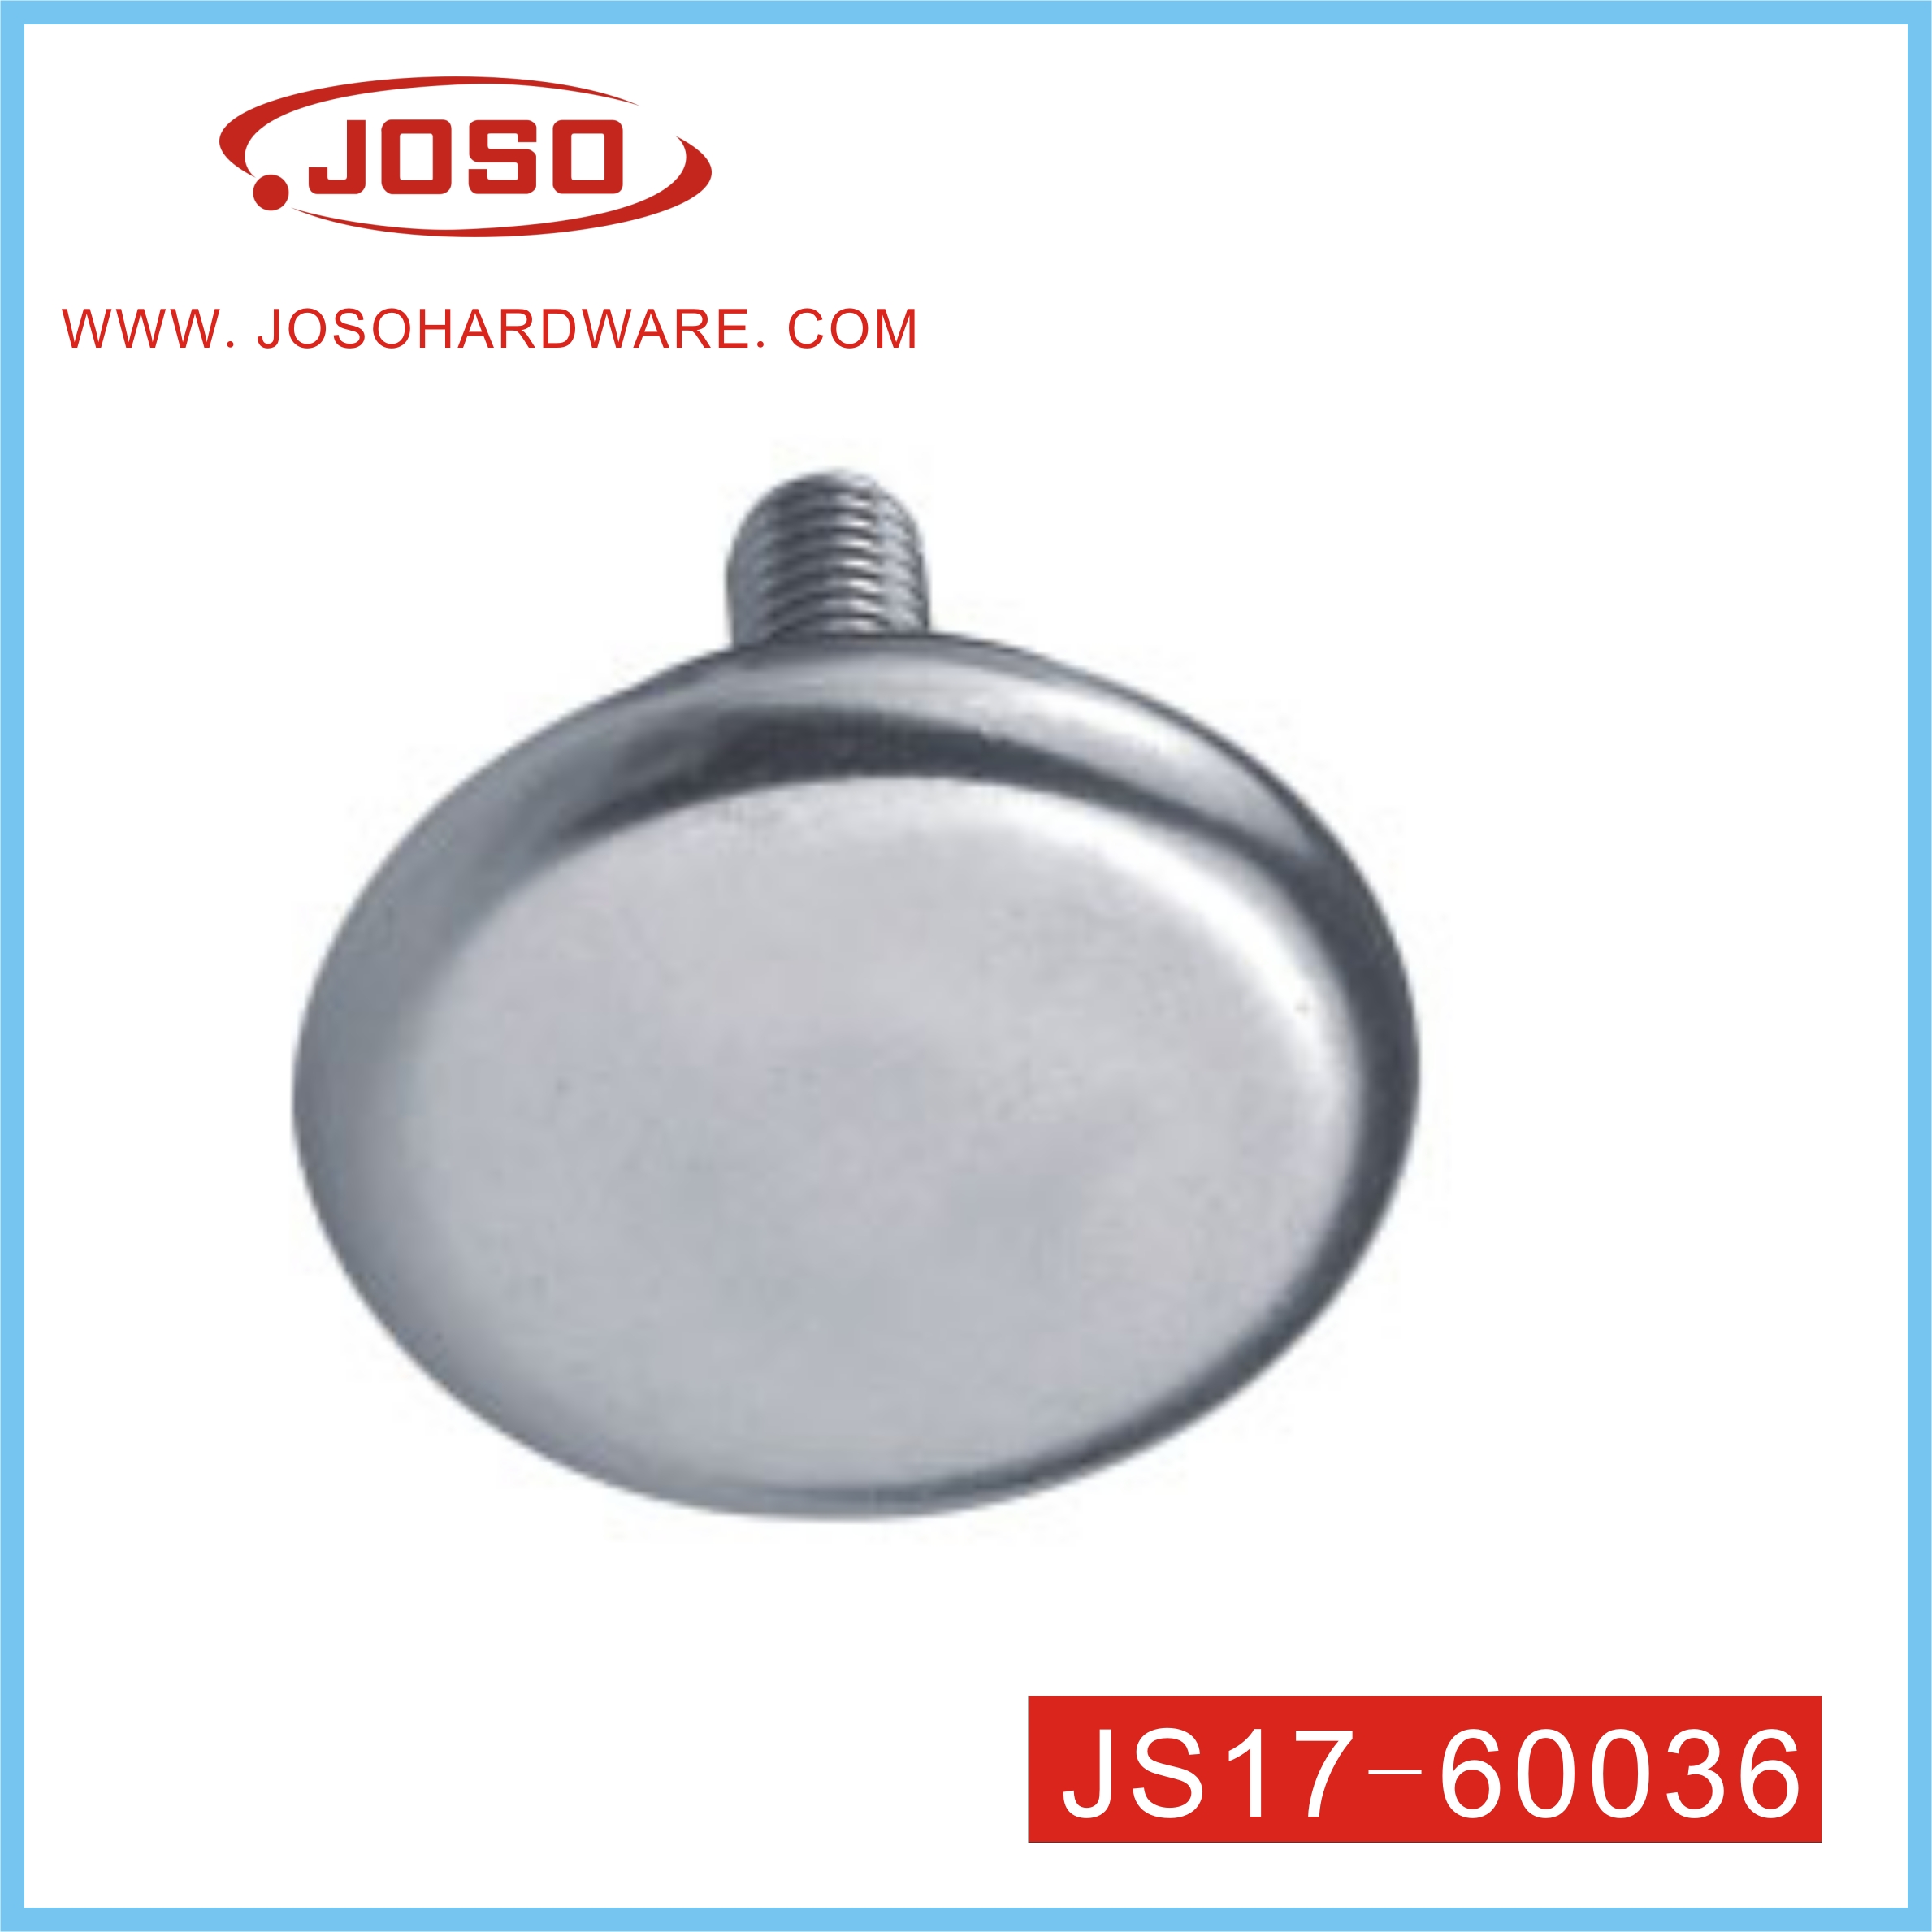 White Metal with Plastic Adjustable Screw of Hardware for Sofa Leg